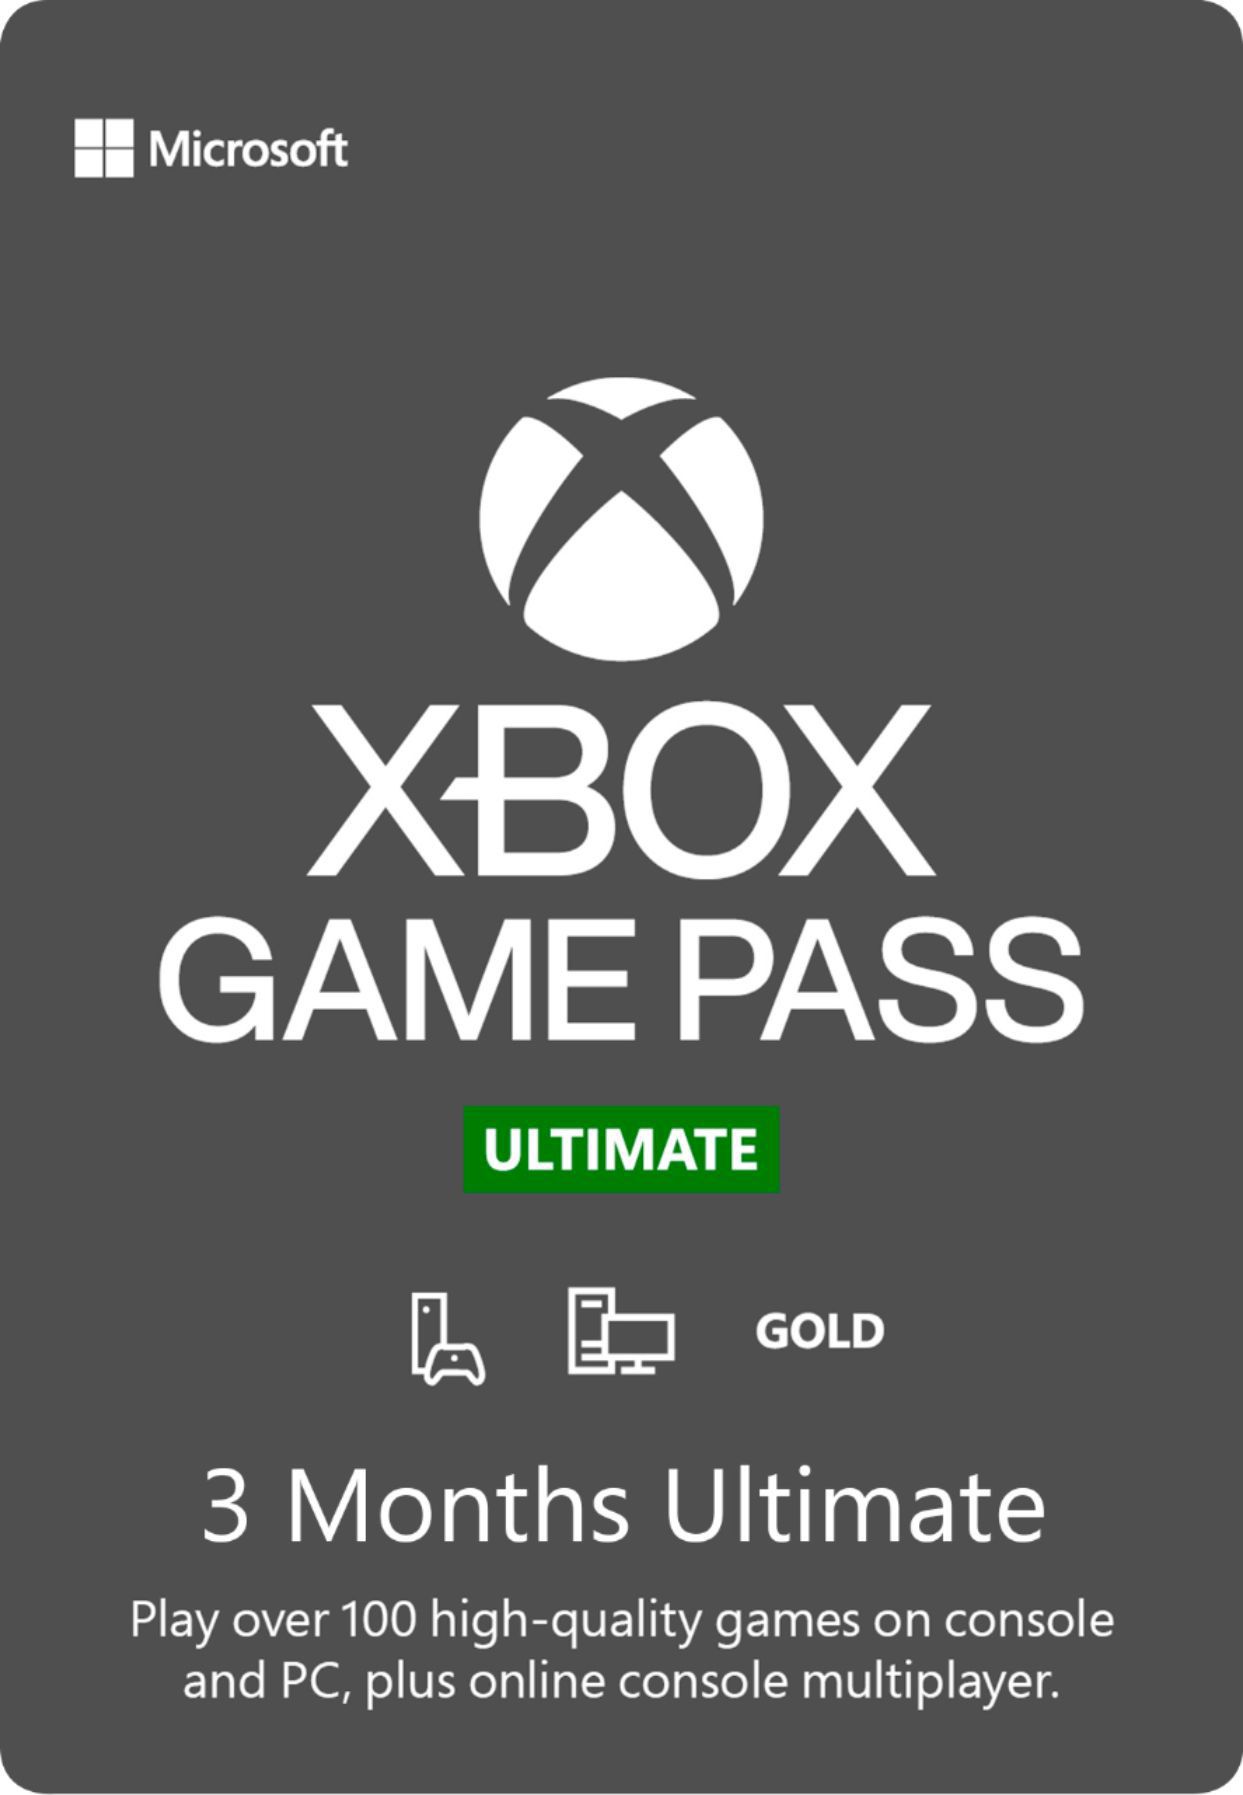 Game Pass Ultímate 3 Month Membership Never Used!